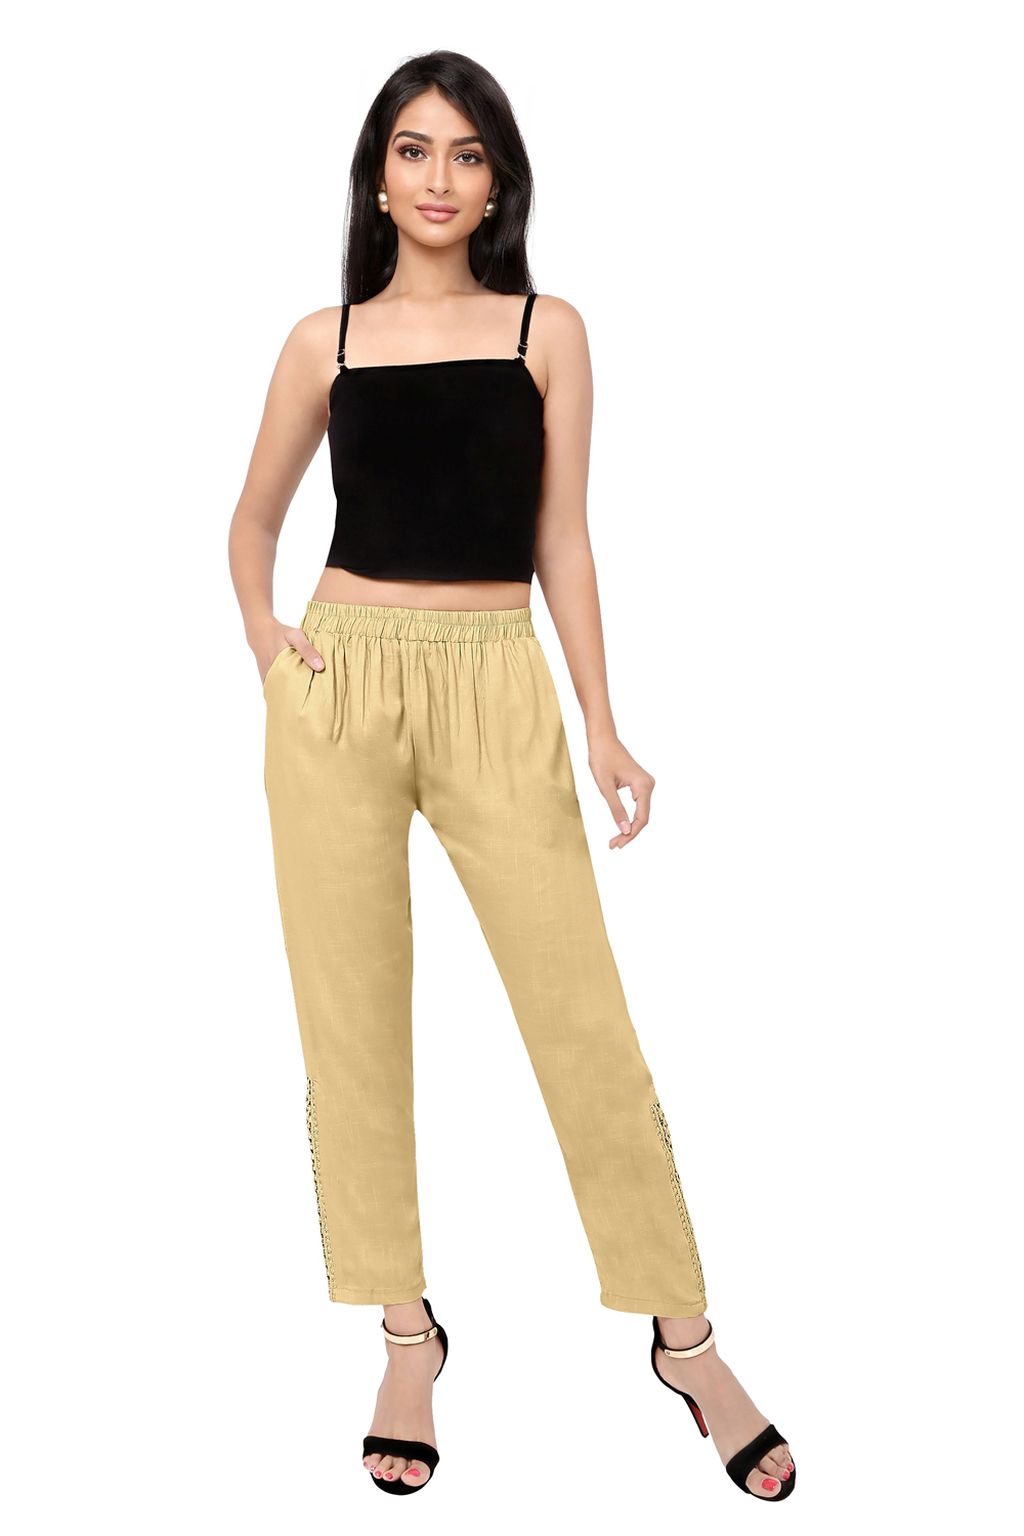 P 13 Launching New Designer cigarette pants wholesale in india -  textiledeal.in